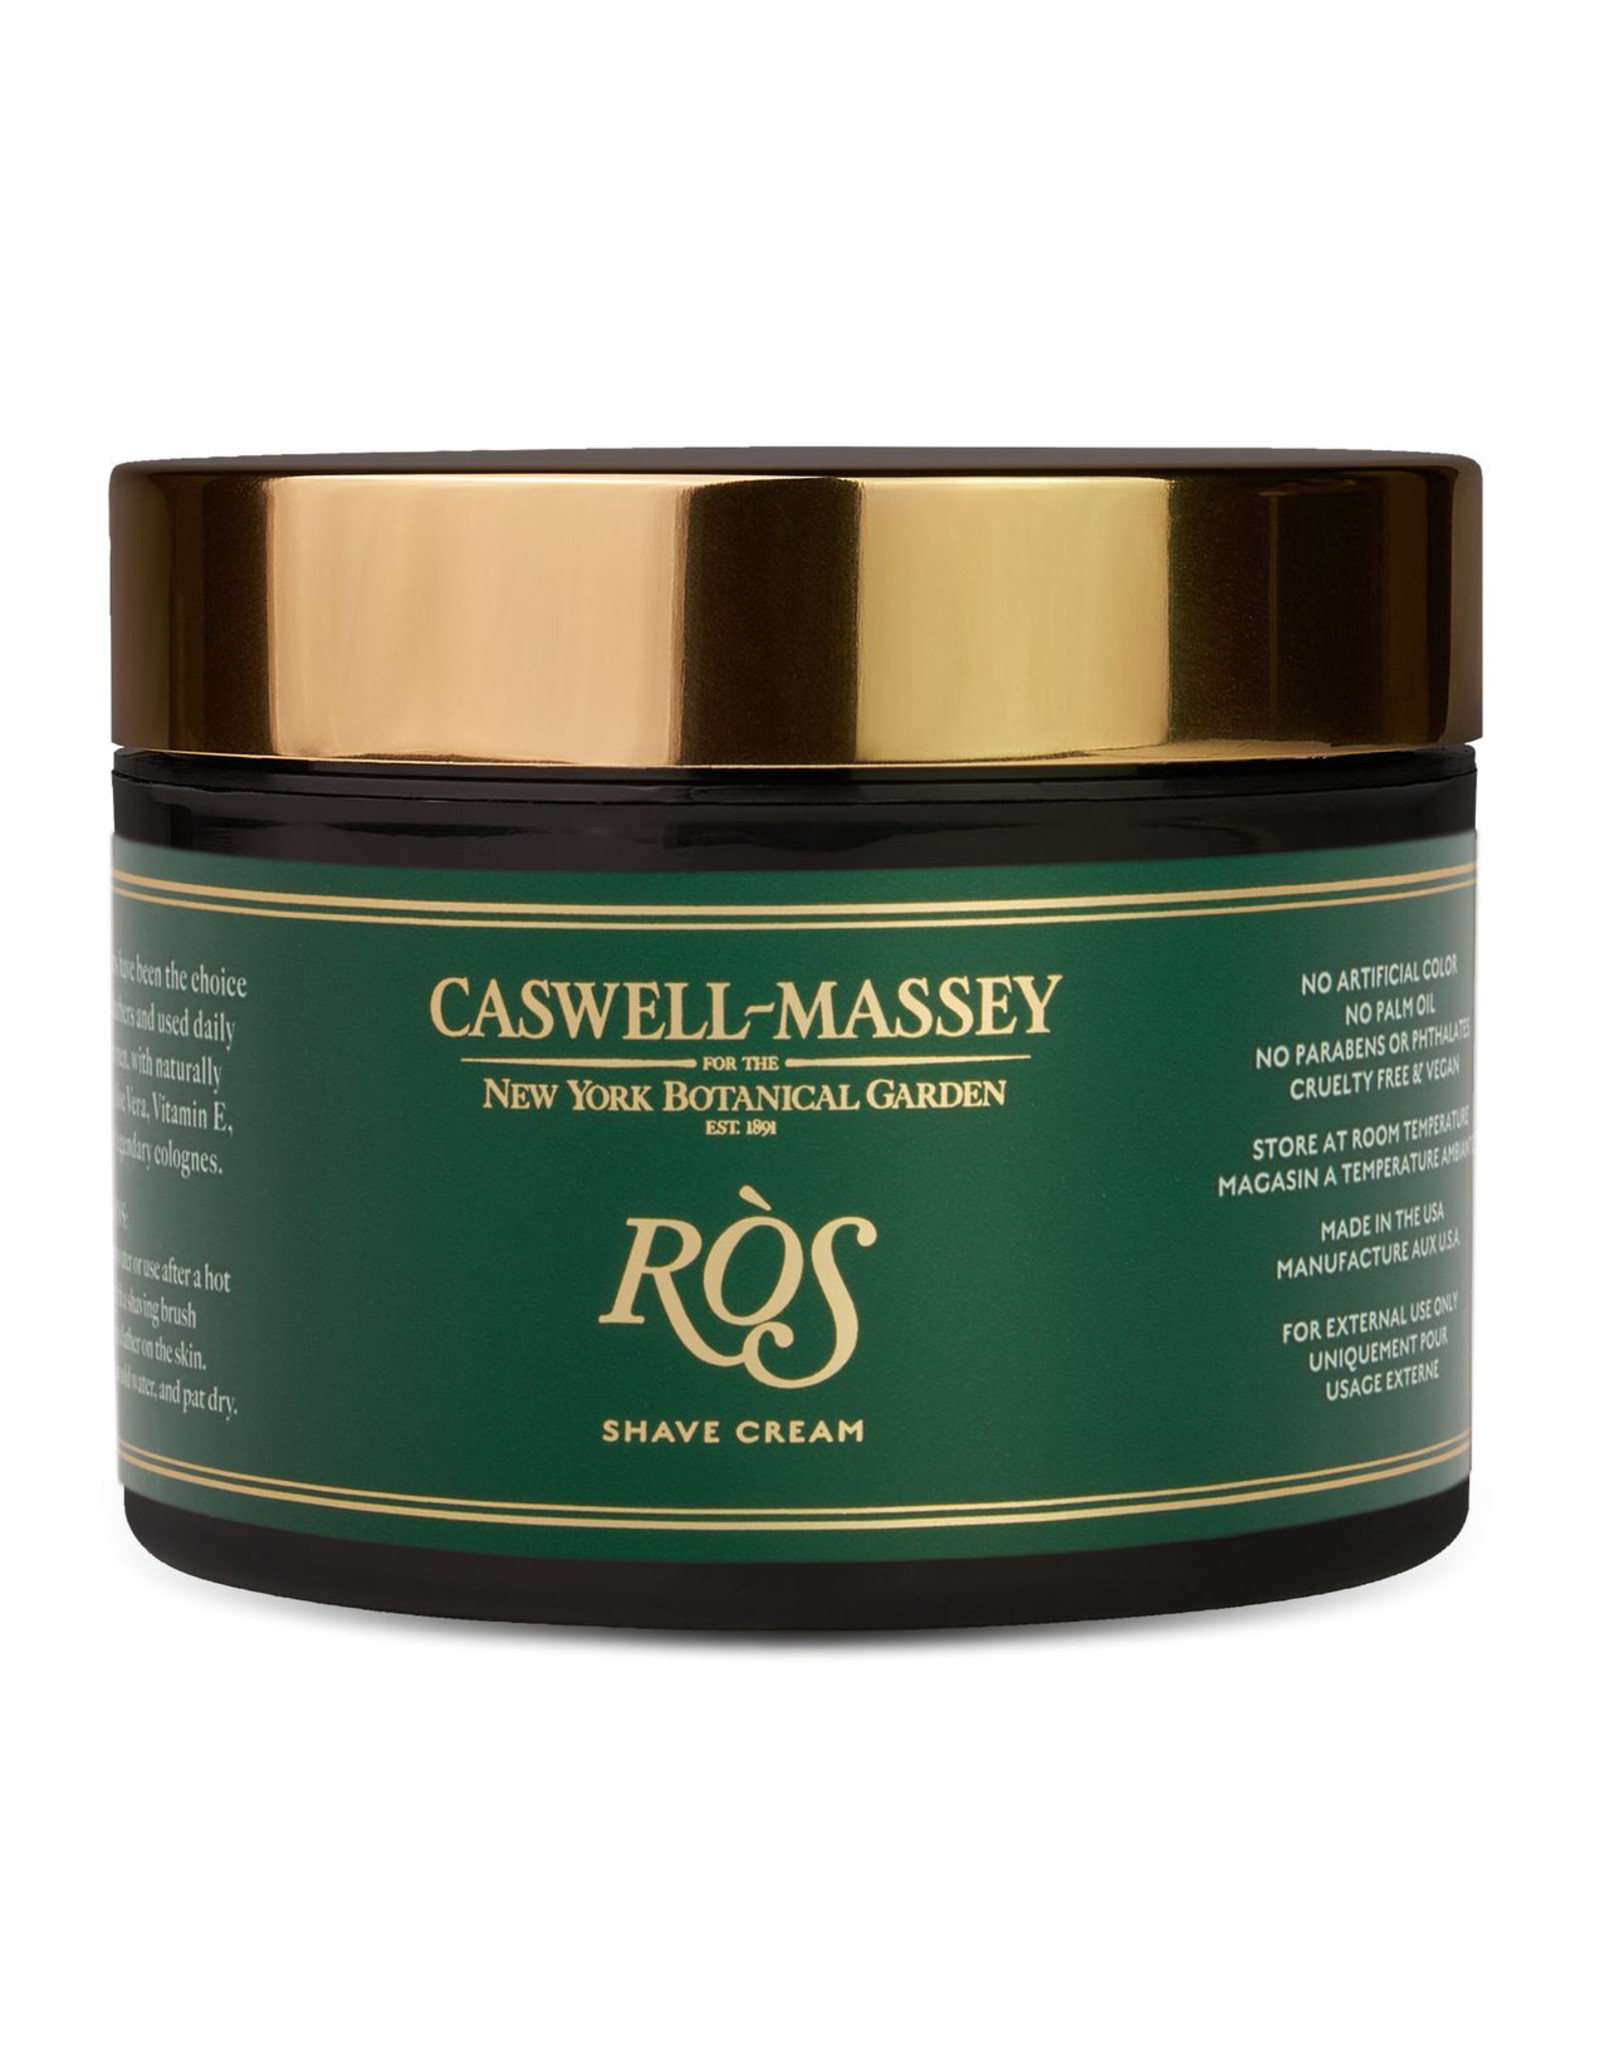 Caswell-Massey Apothecary RÓS Shave Cream in Jar | 8oz